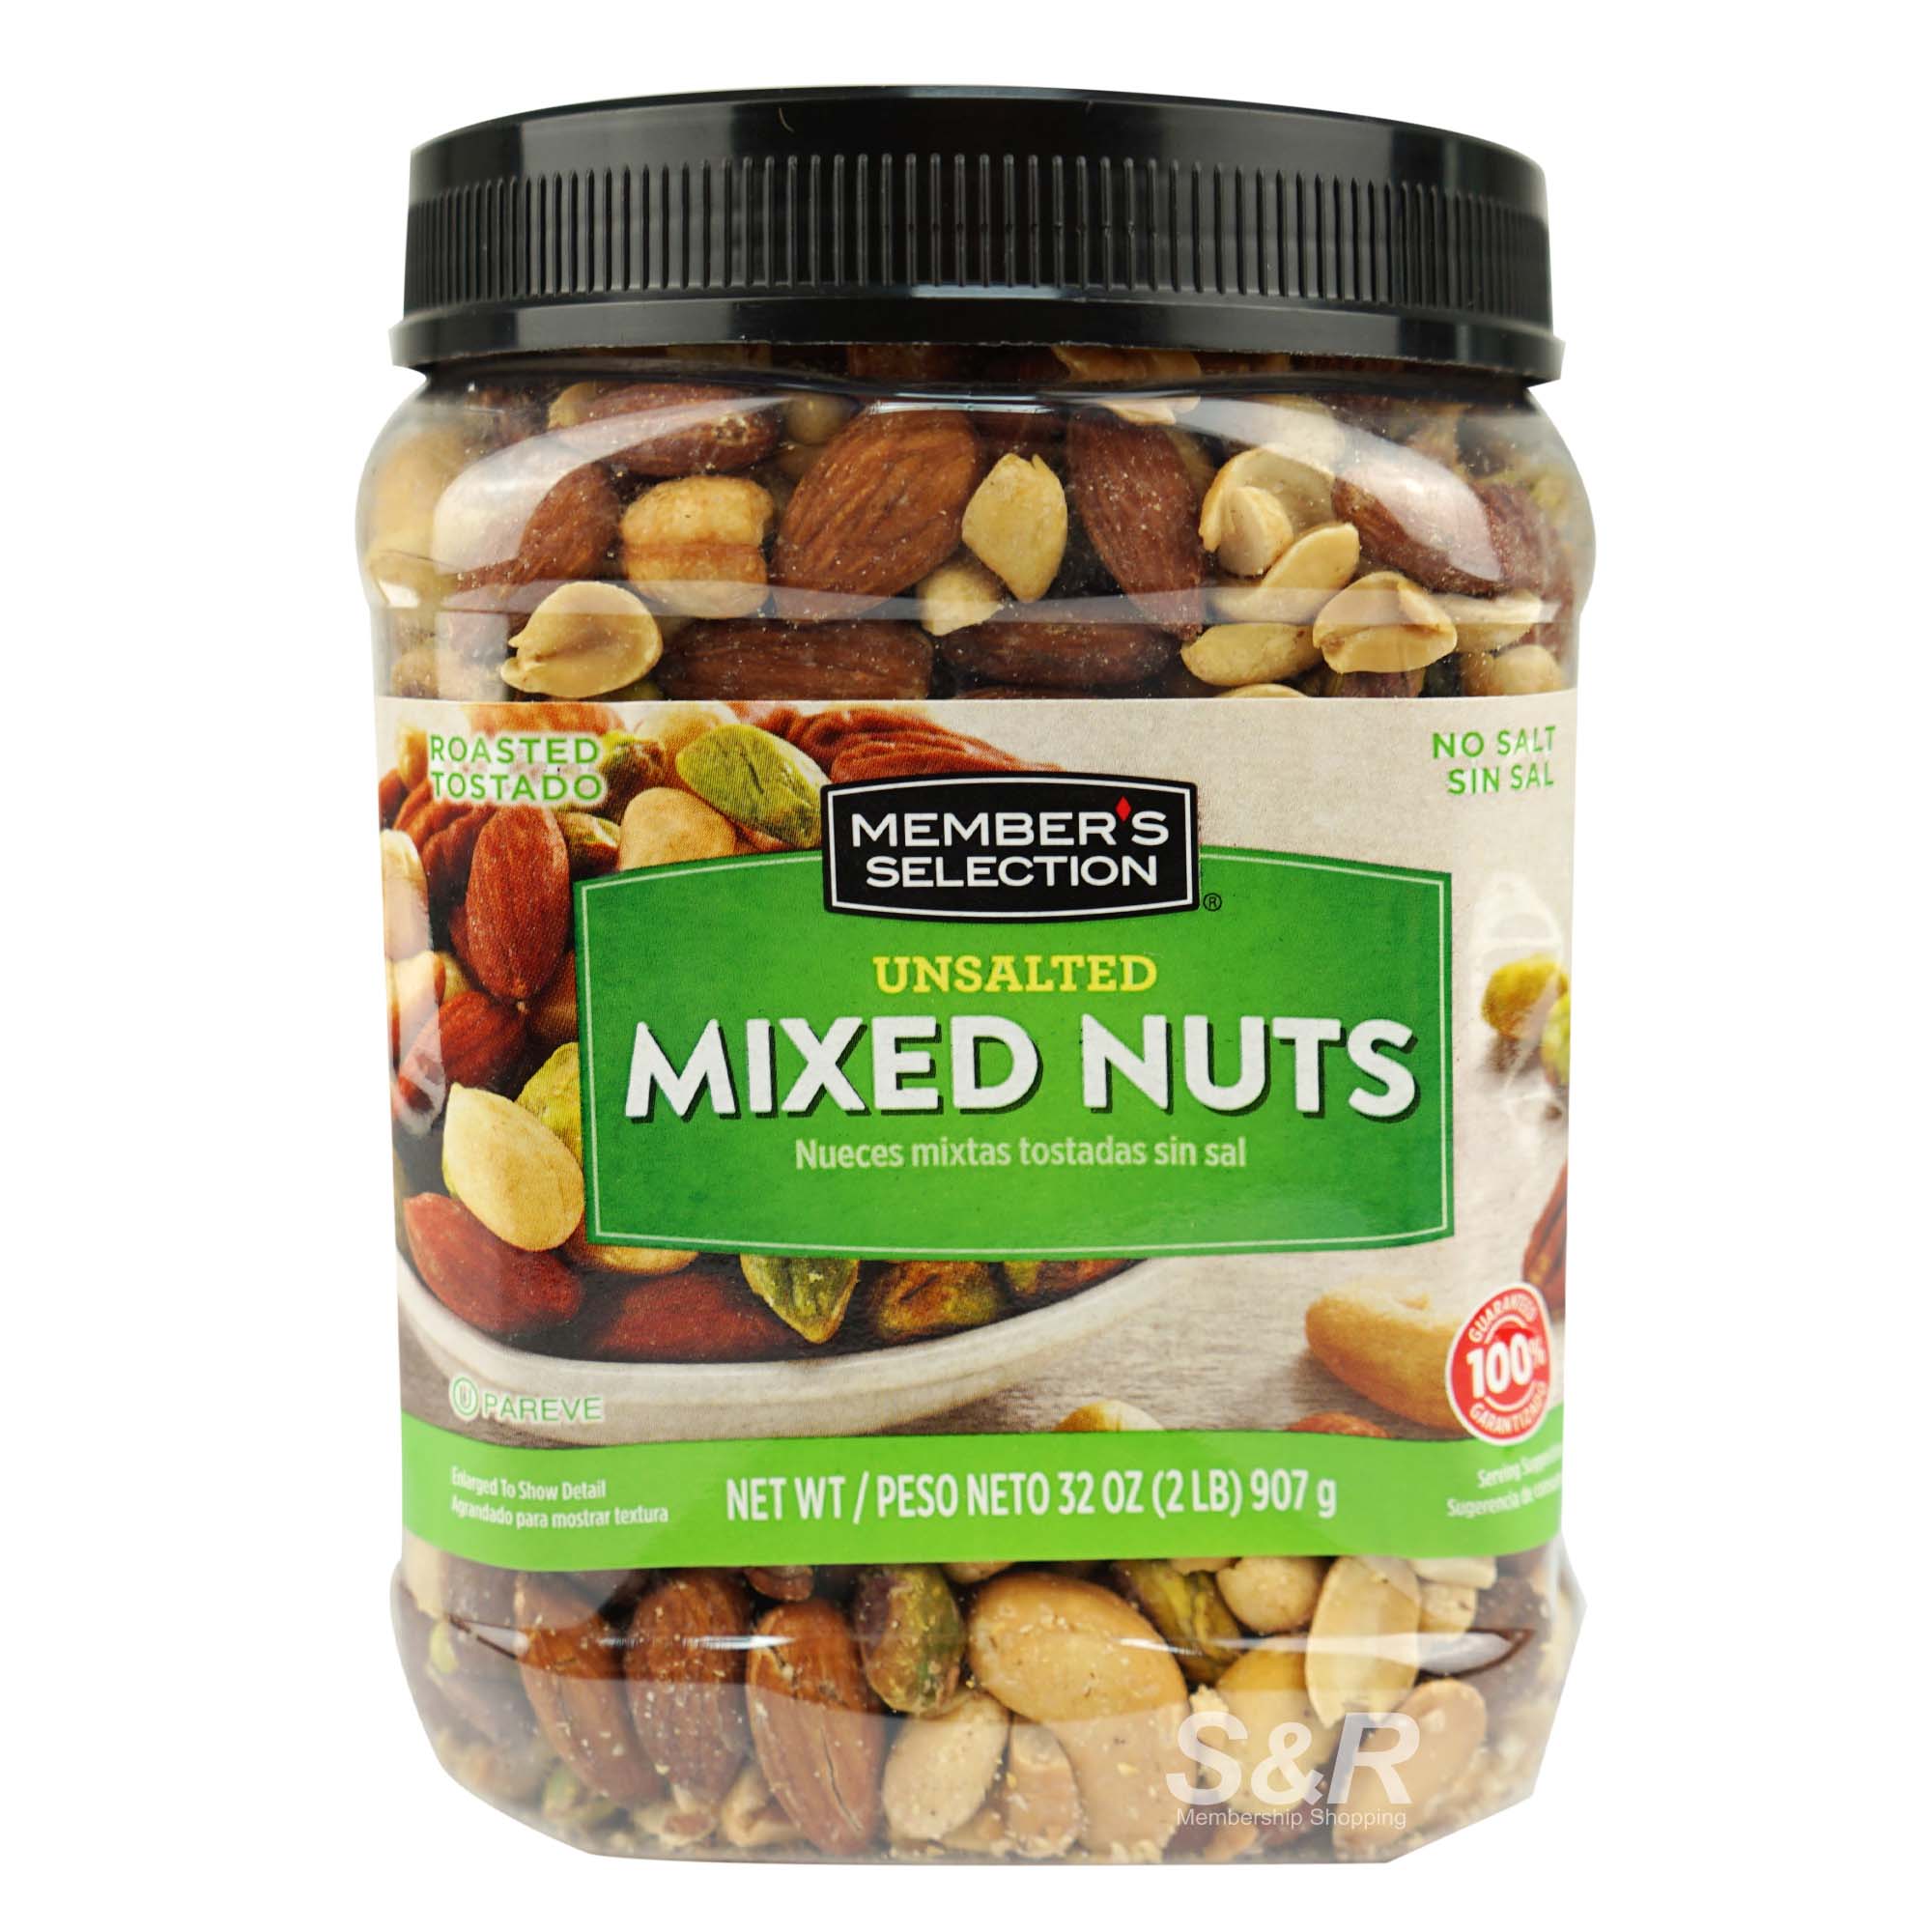 Member's Selection Unsalted Mixed Nuts 907g